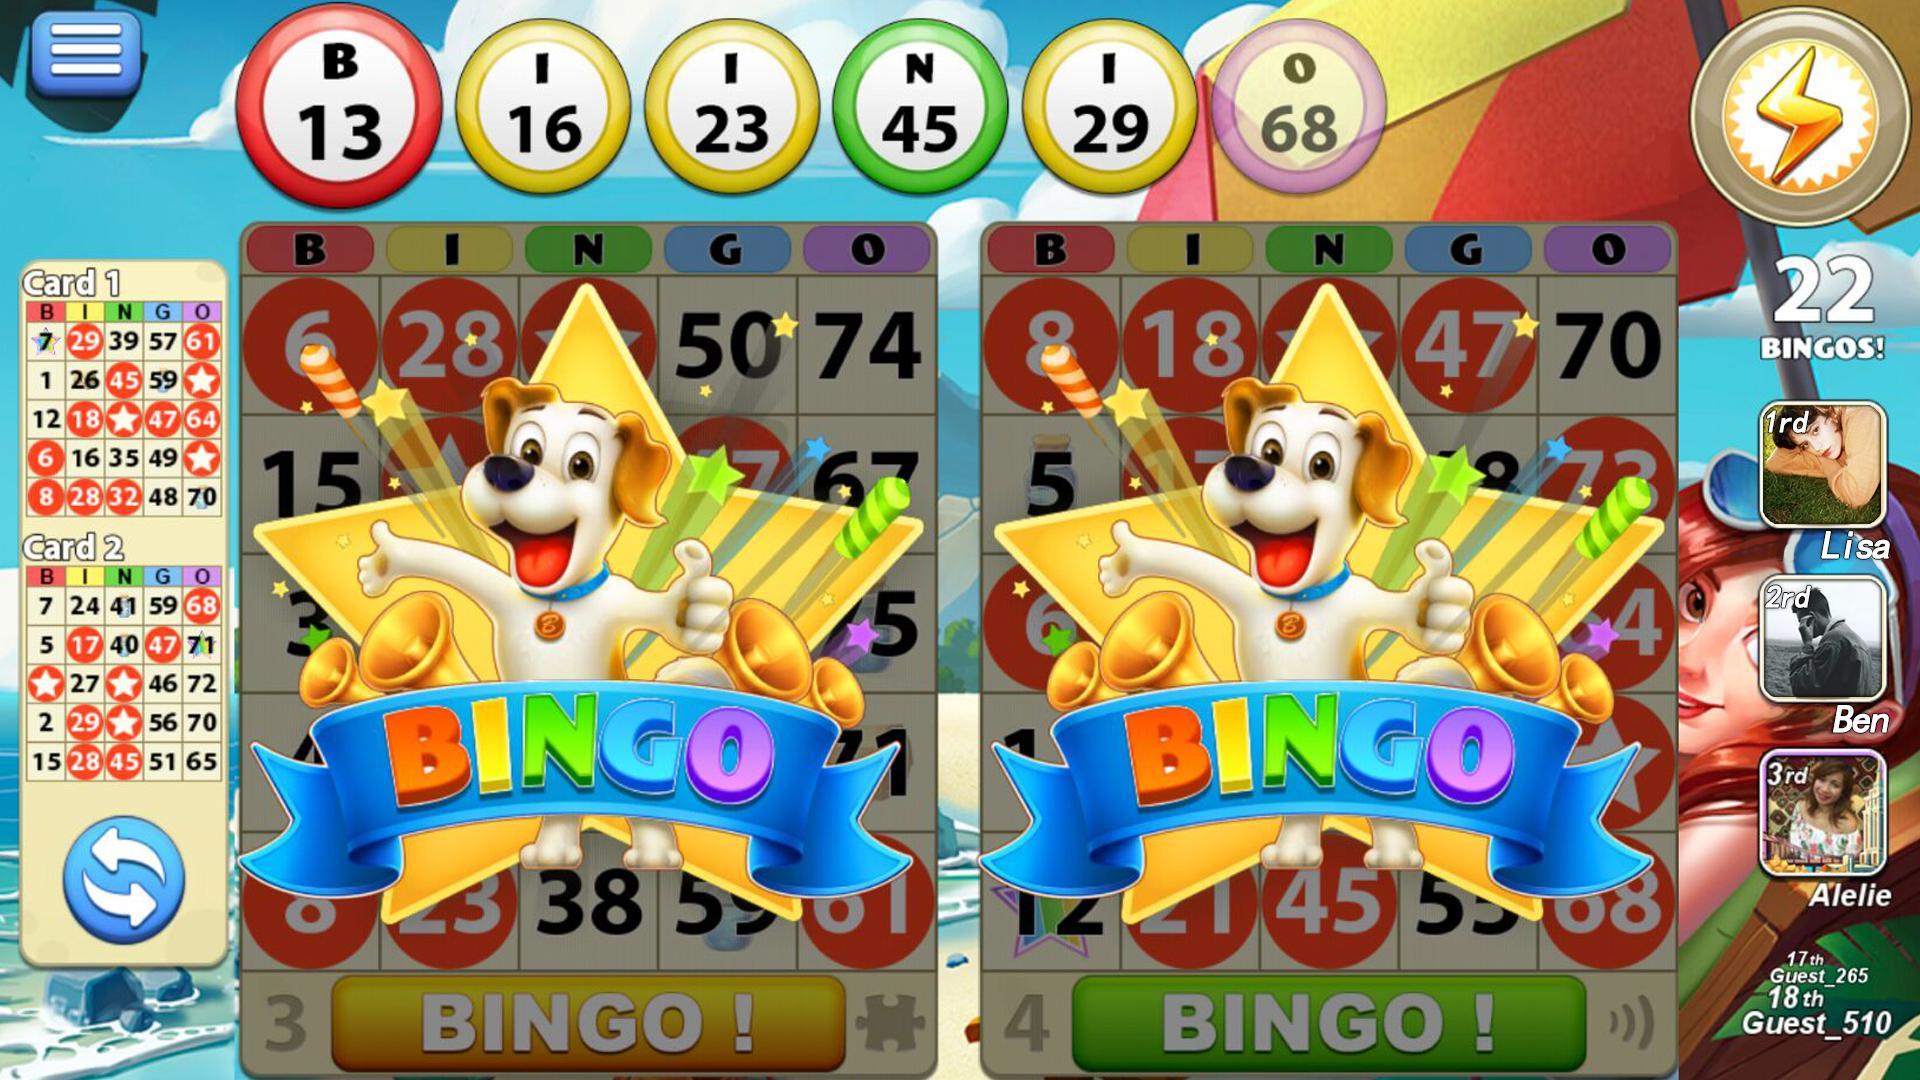 Bingo Scapes Lucky Bingo Games Free To Play For Android - bing games roblox